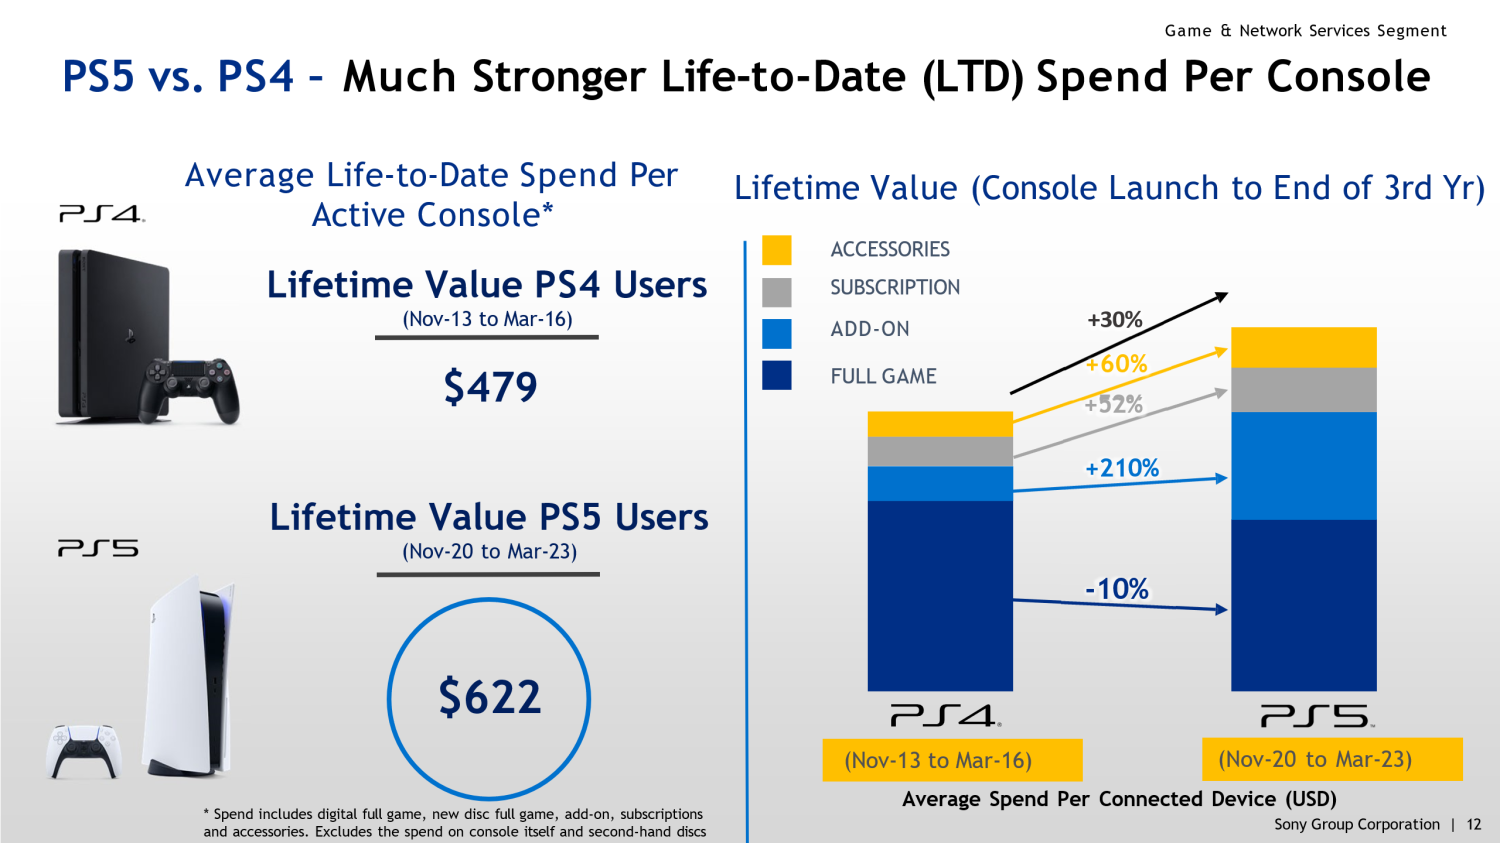 TweakTown Enlarged Image - Sony says that PS5 users have an average LifeTime Value of $622.